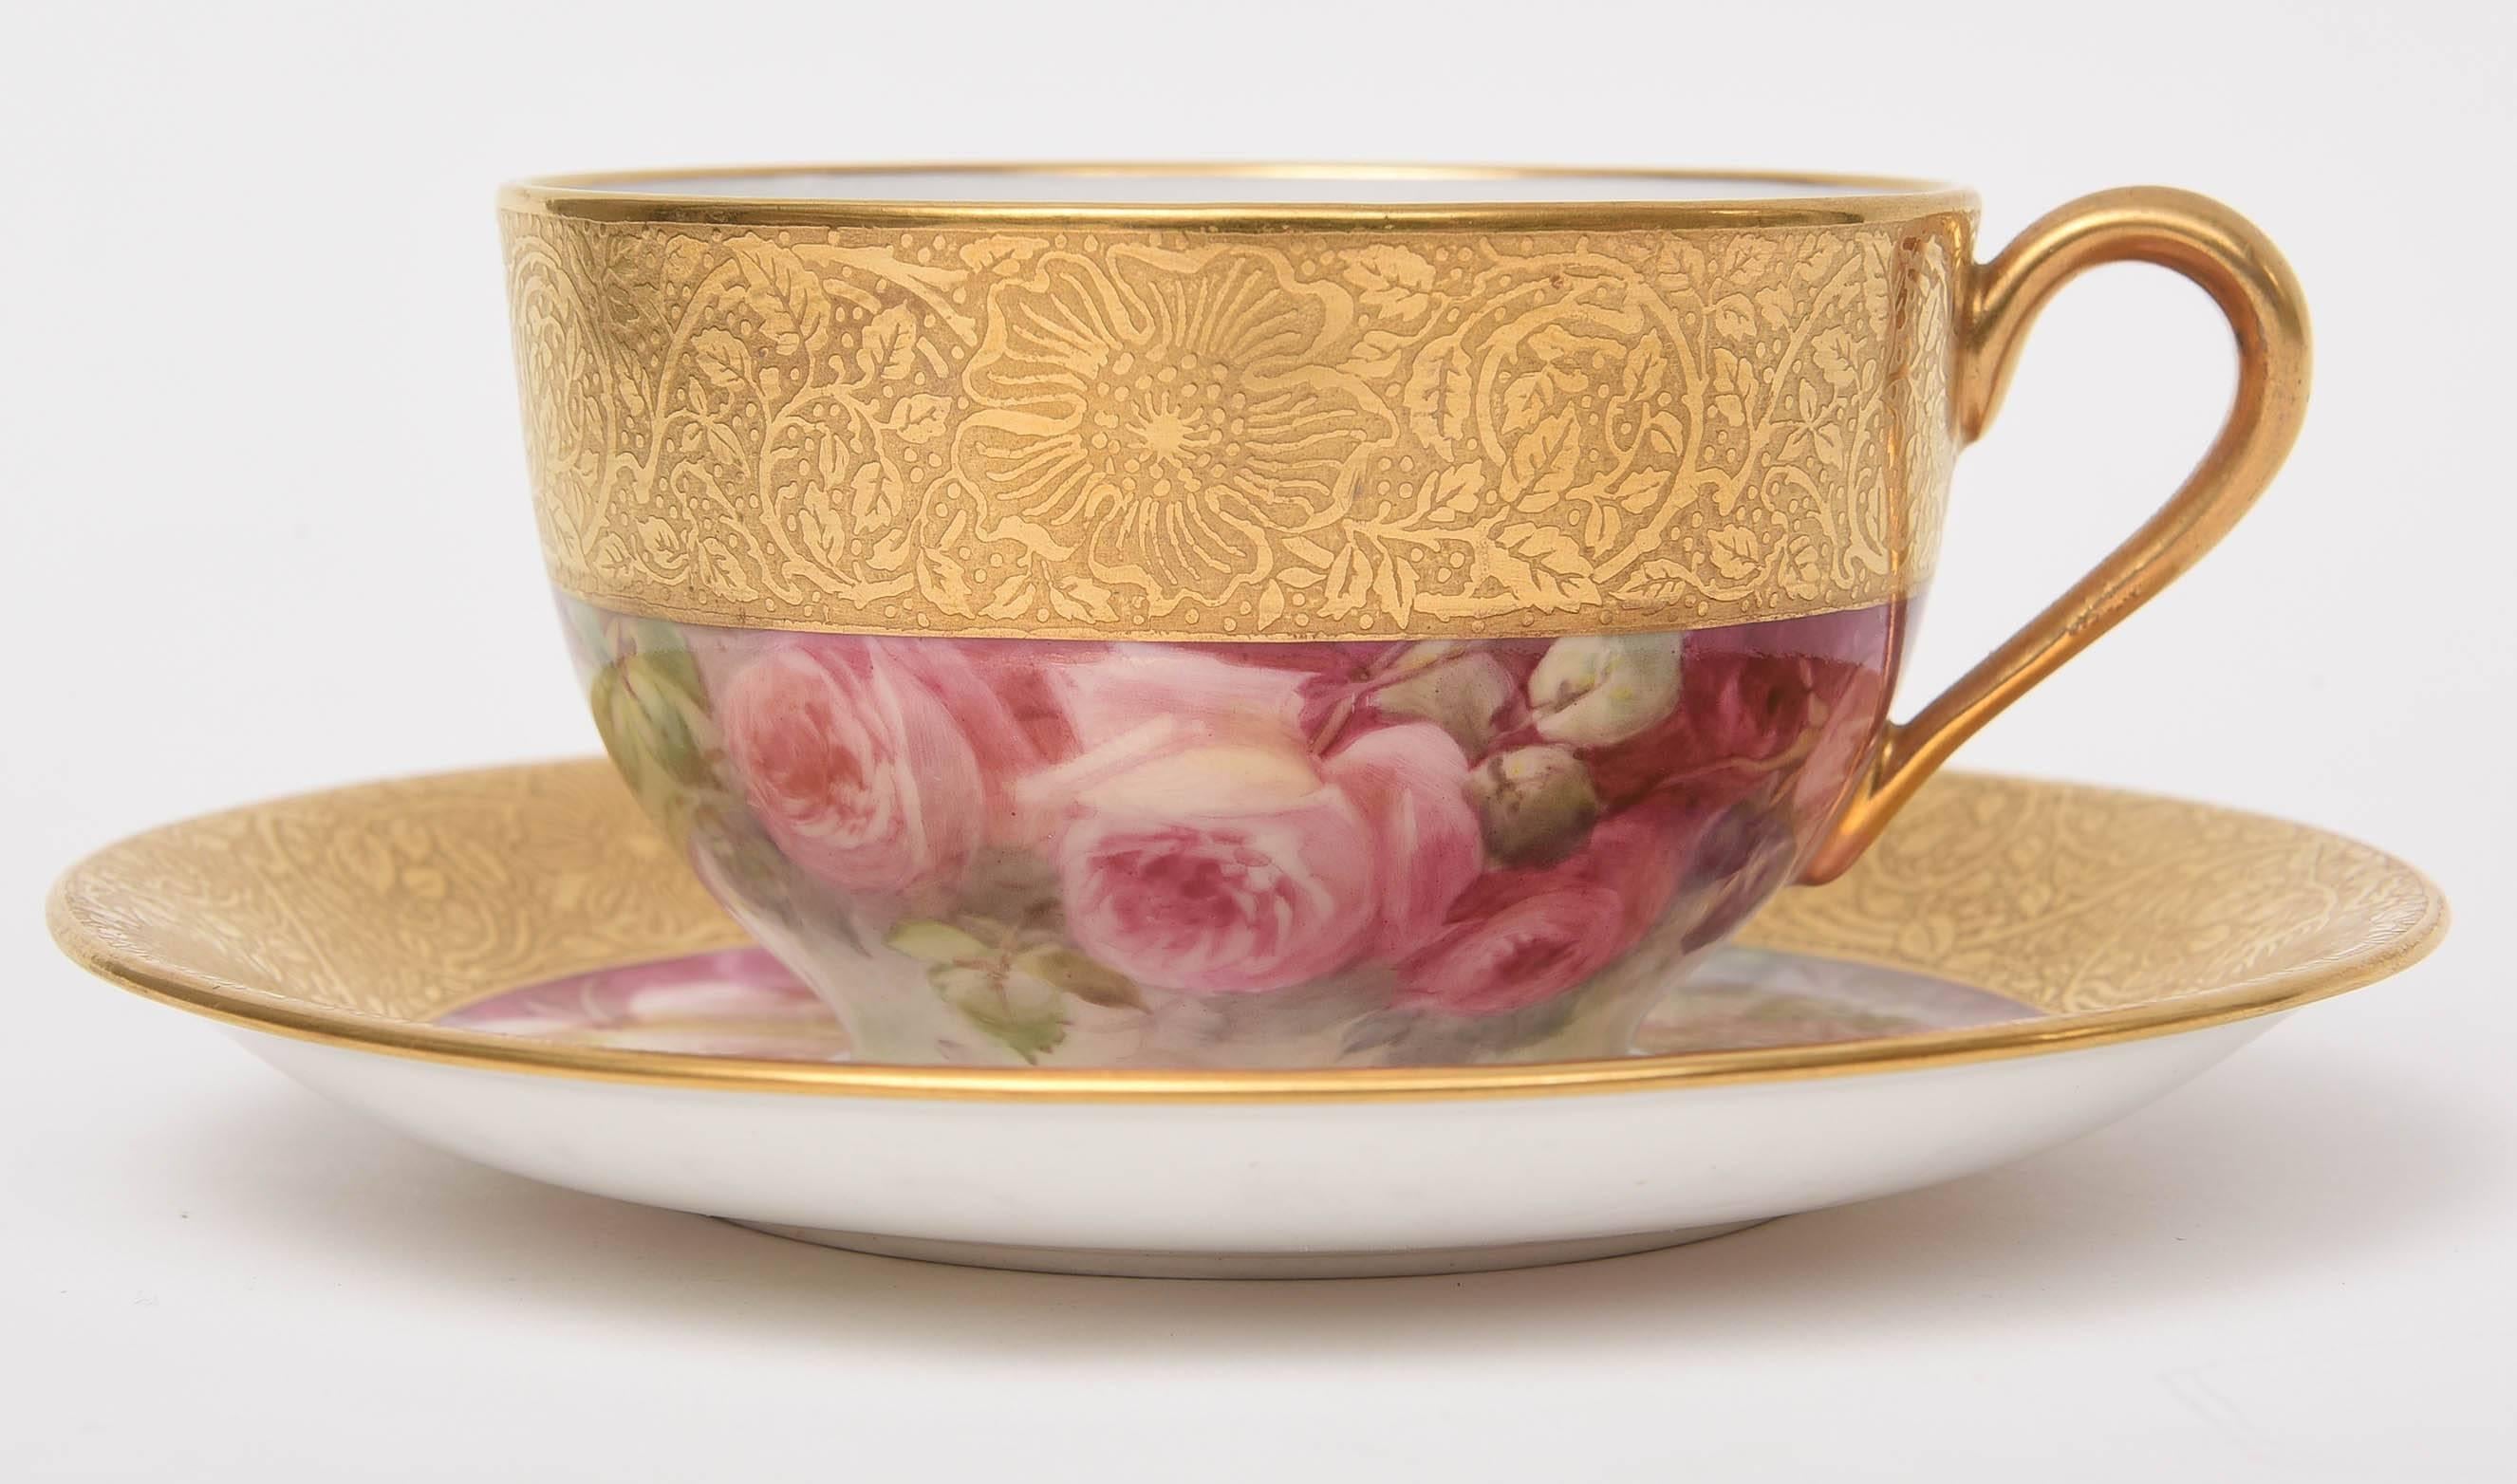 A rare and beautiful set of 12 hand-painted porcelain cup and saucers from Lenox. Masterfully painted by their re known artist: William Morley. A thick acid etched 24-karat gold band surrounds the top of the cup and saucer collar. The roses are